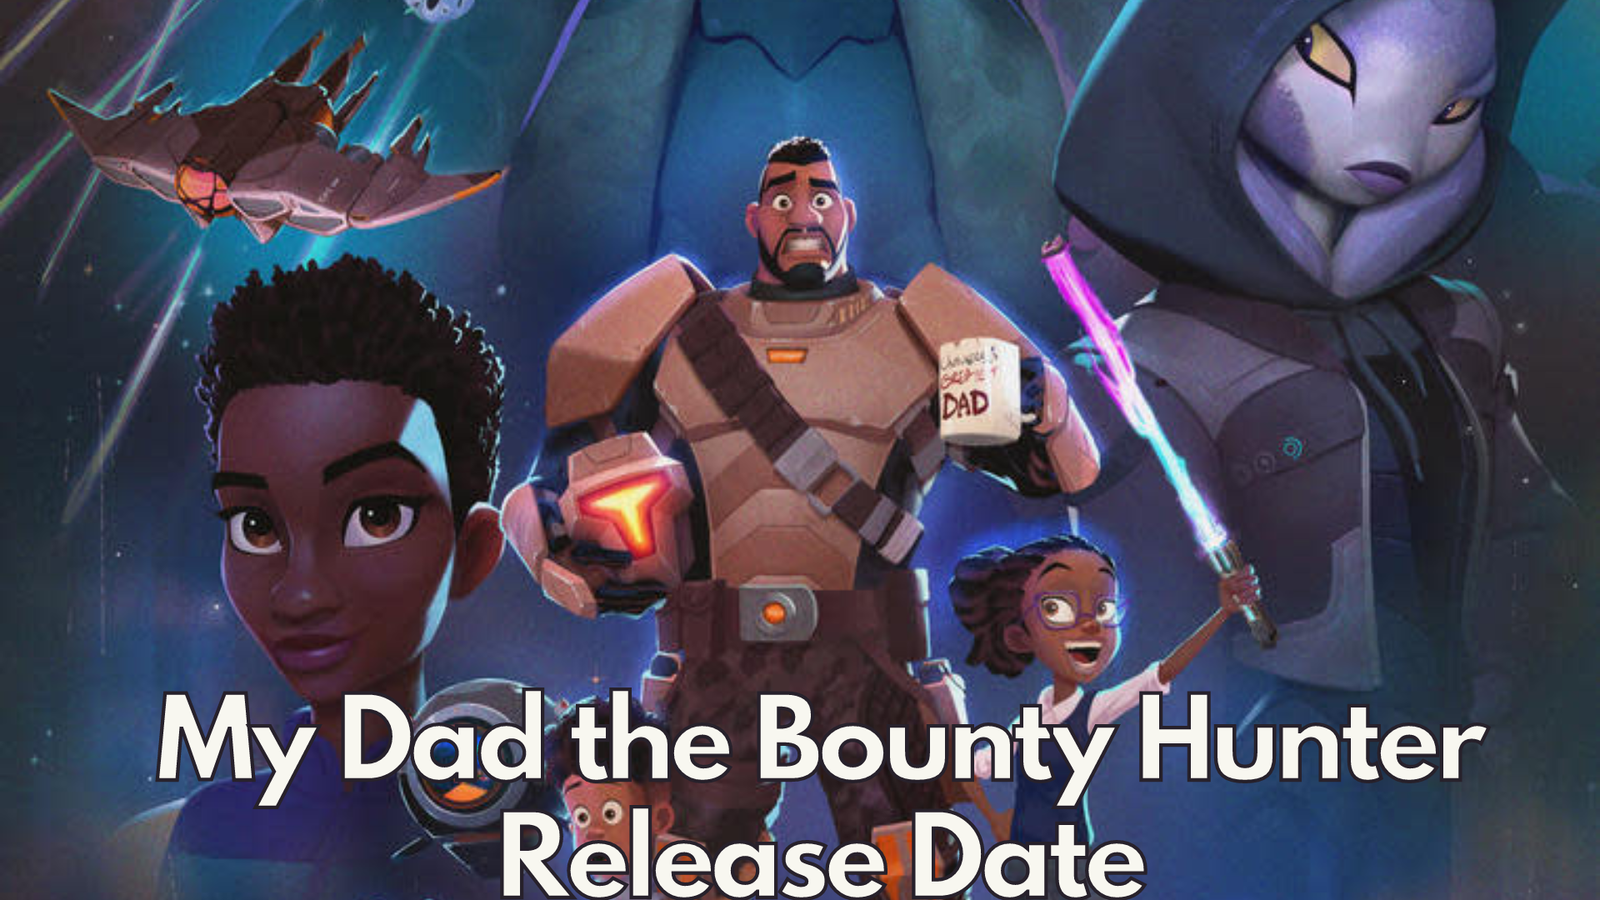 My Dad the Bounty Hunter Release Date